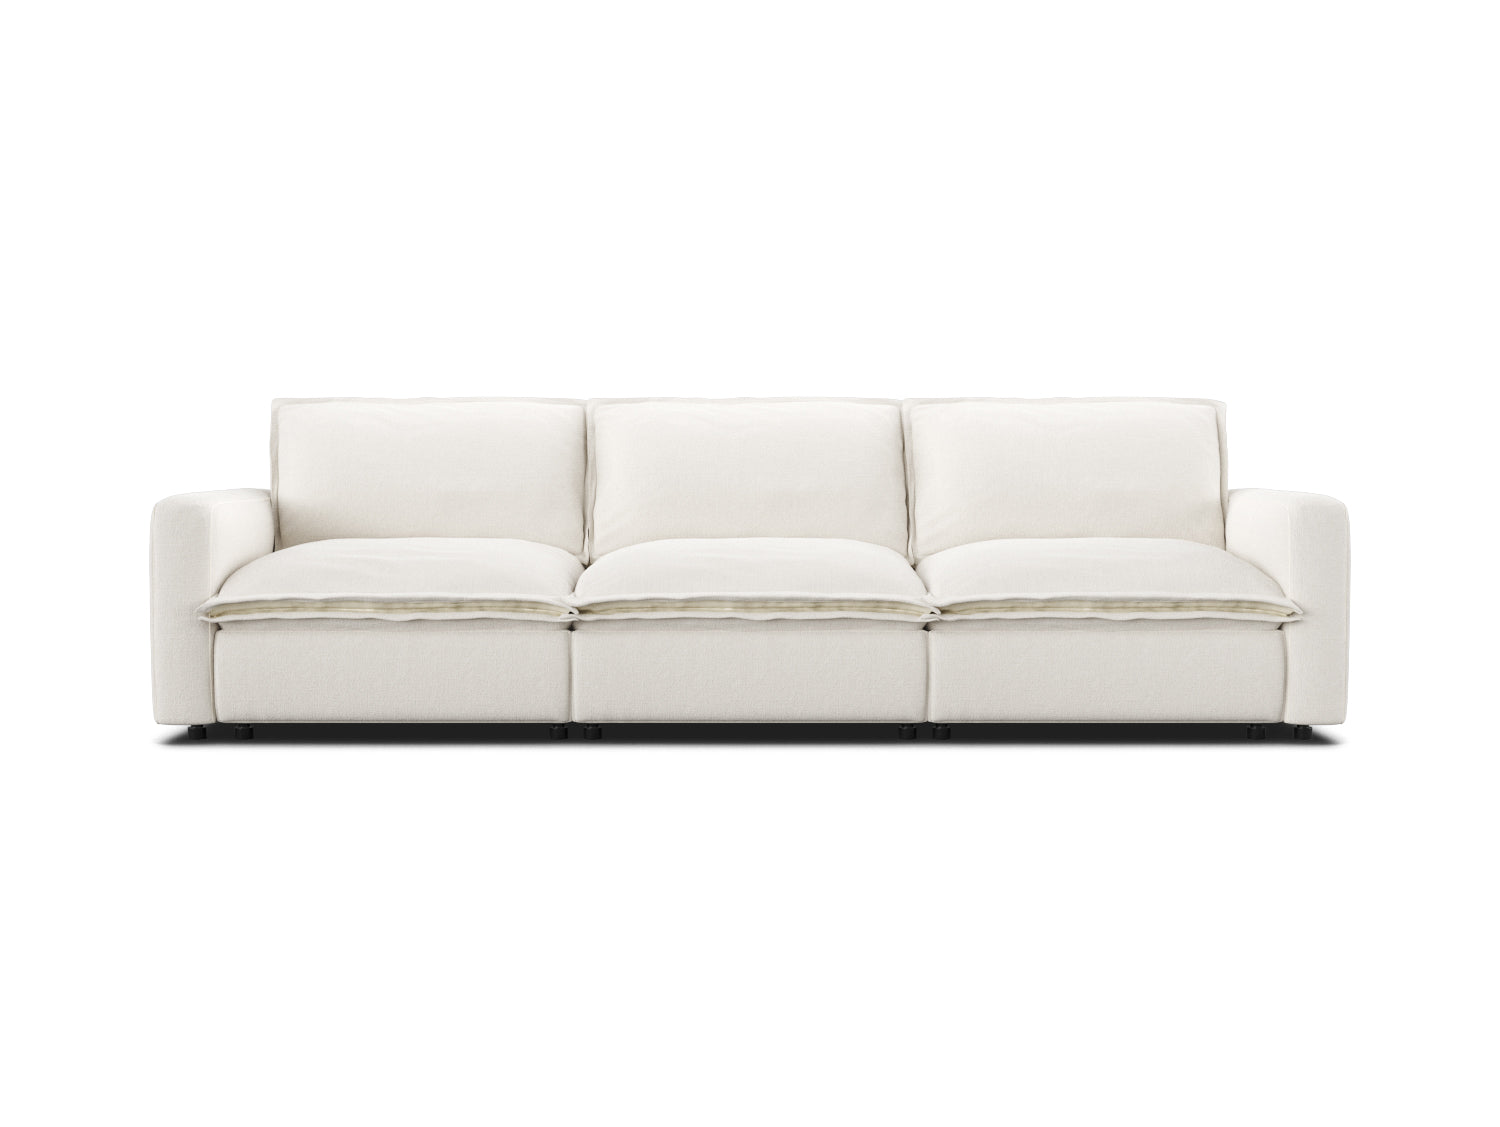 3 Seat Couch in White Linen - Modular Couch | Homebody